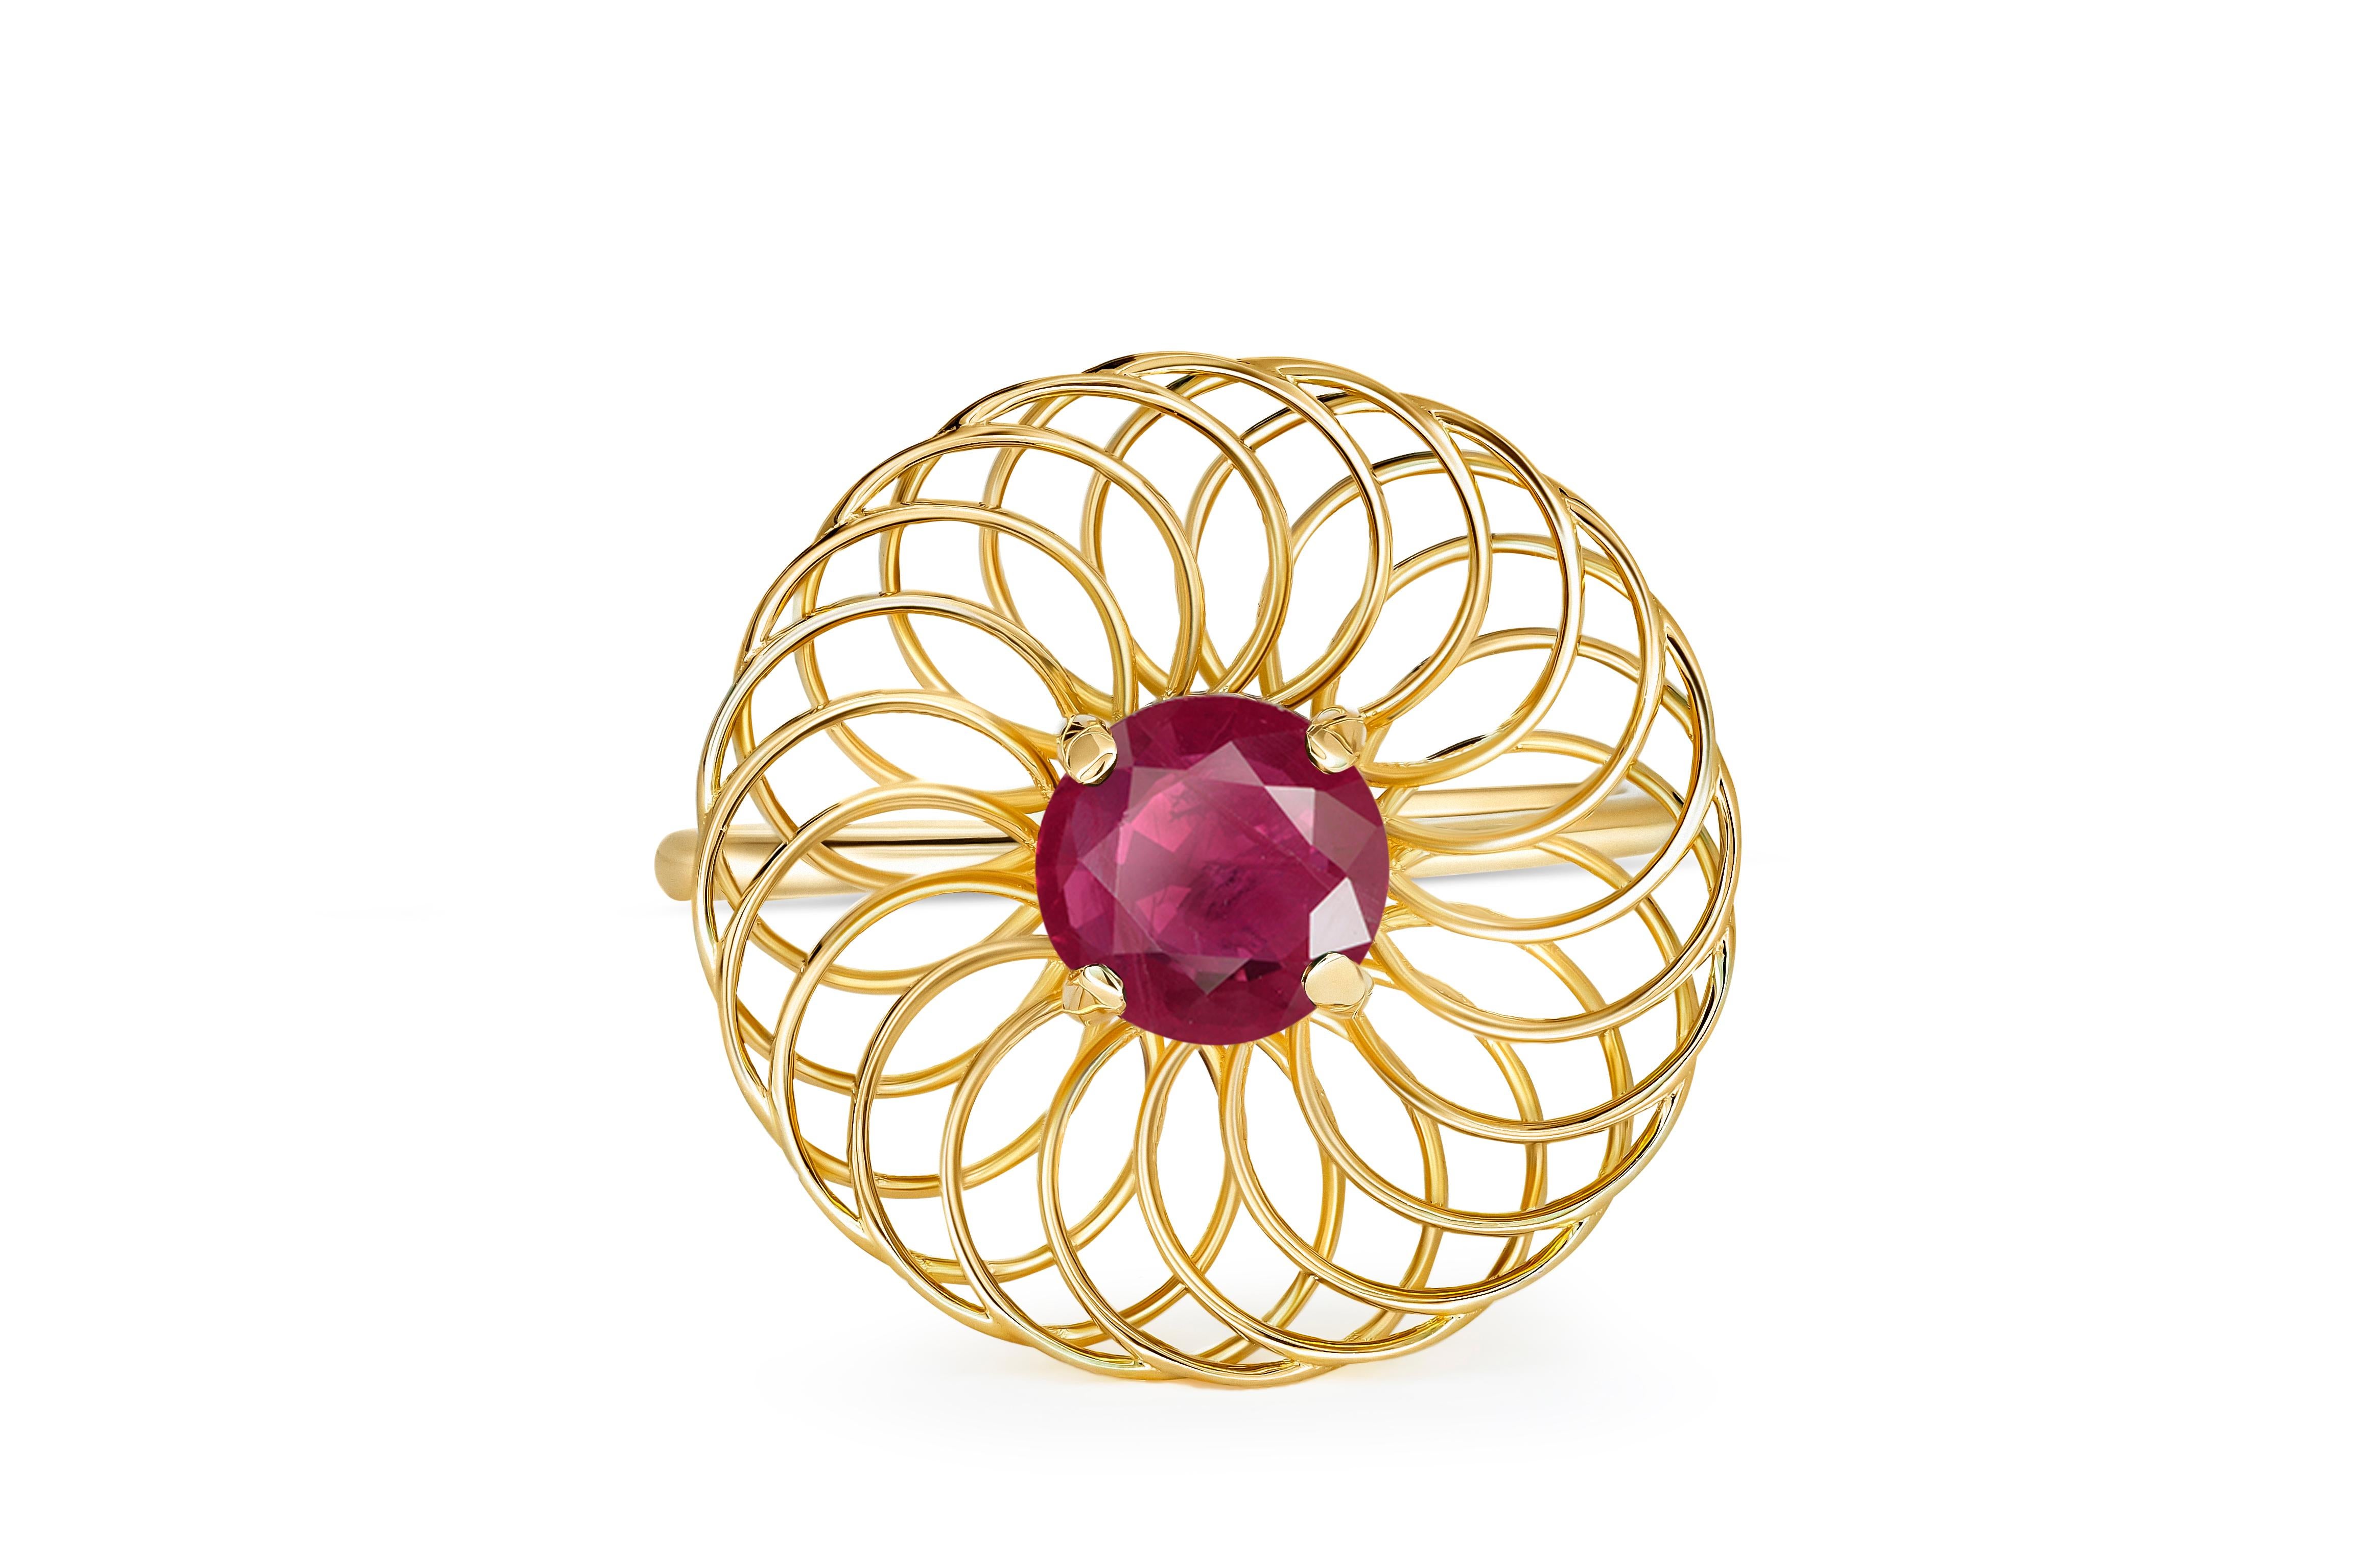 Round ruby 14k gold ring. 
Ruby engagement ring. Ruby Geometric ring. Genuine ruby ring. Ruby vintage ring. July birthstone ring.

Metal type: 14kt solid gold
Weight 2.00 g. depends from size

Gemstones:
Central stone: natural ruby
Cut: